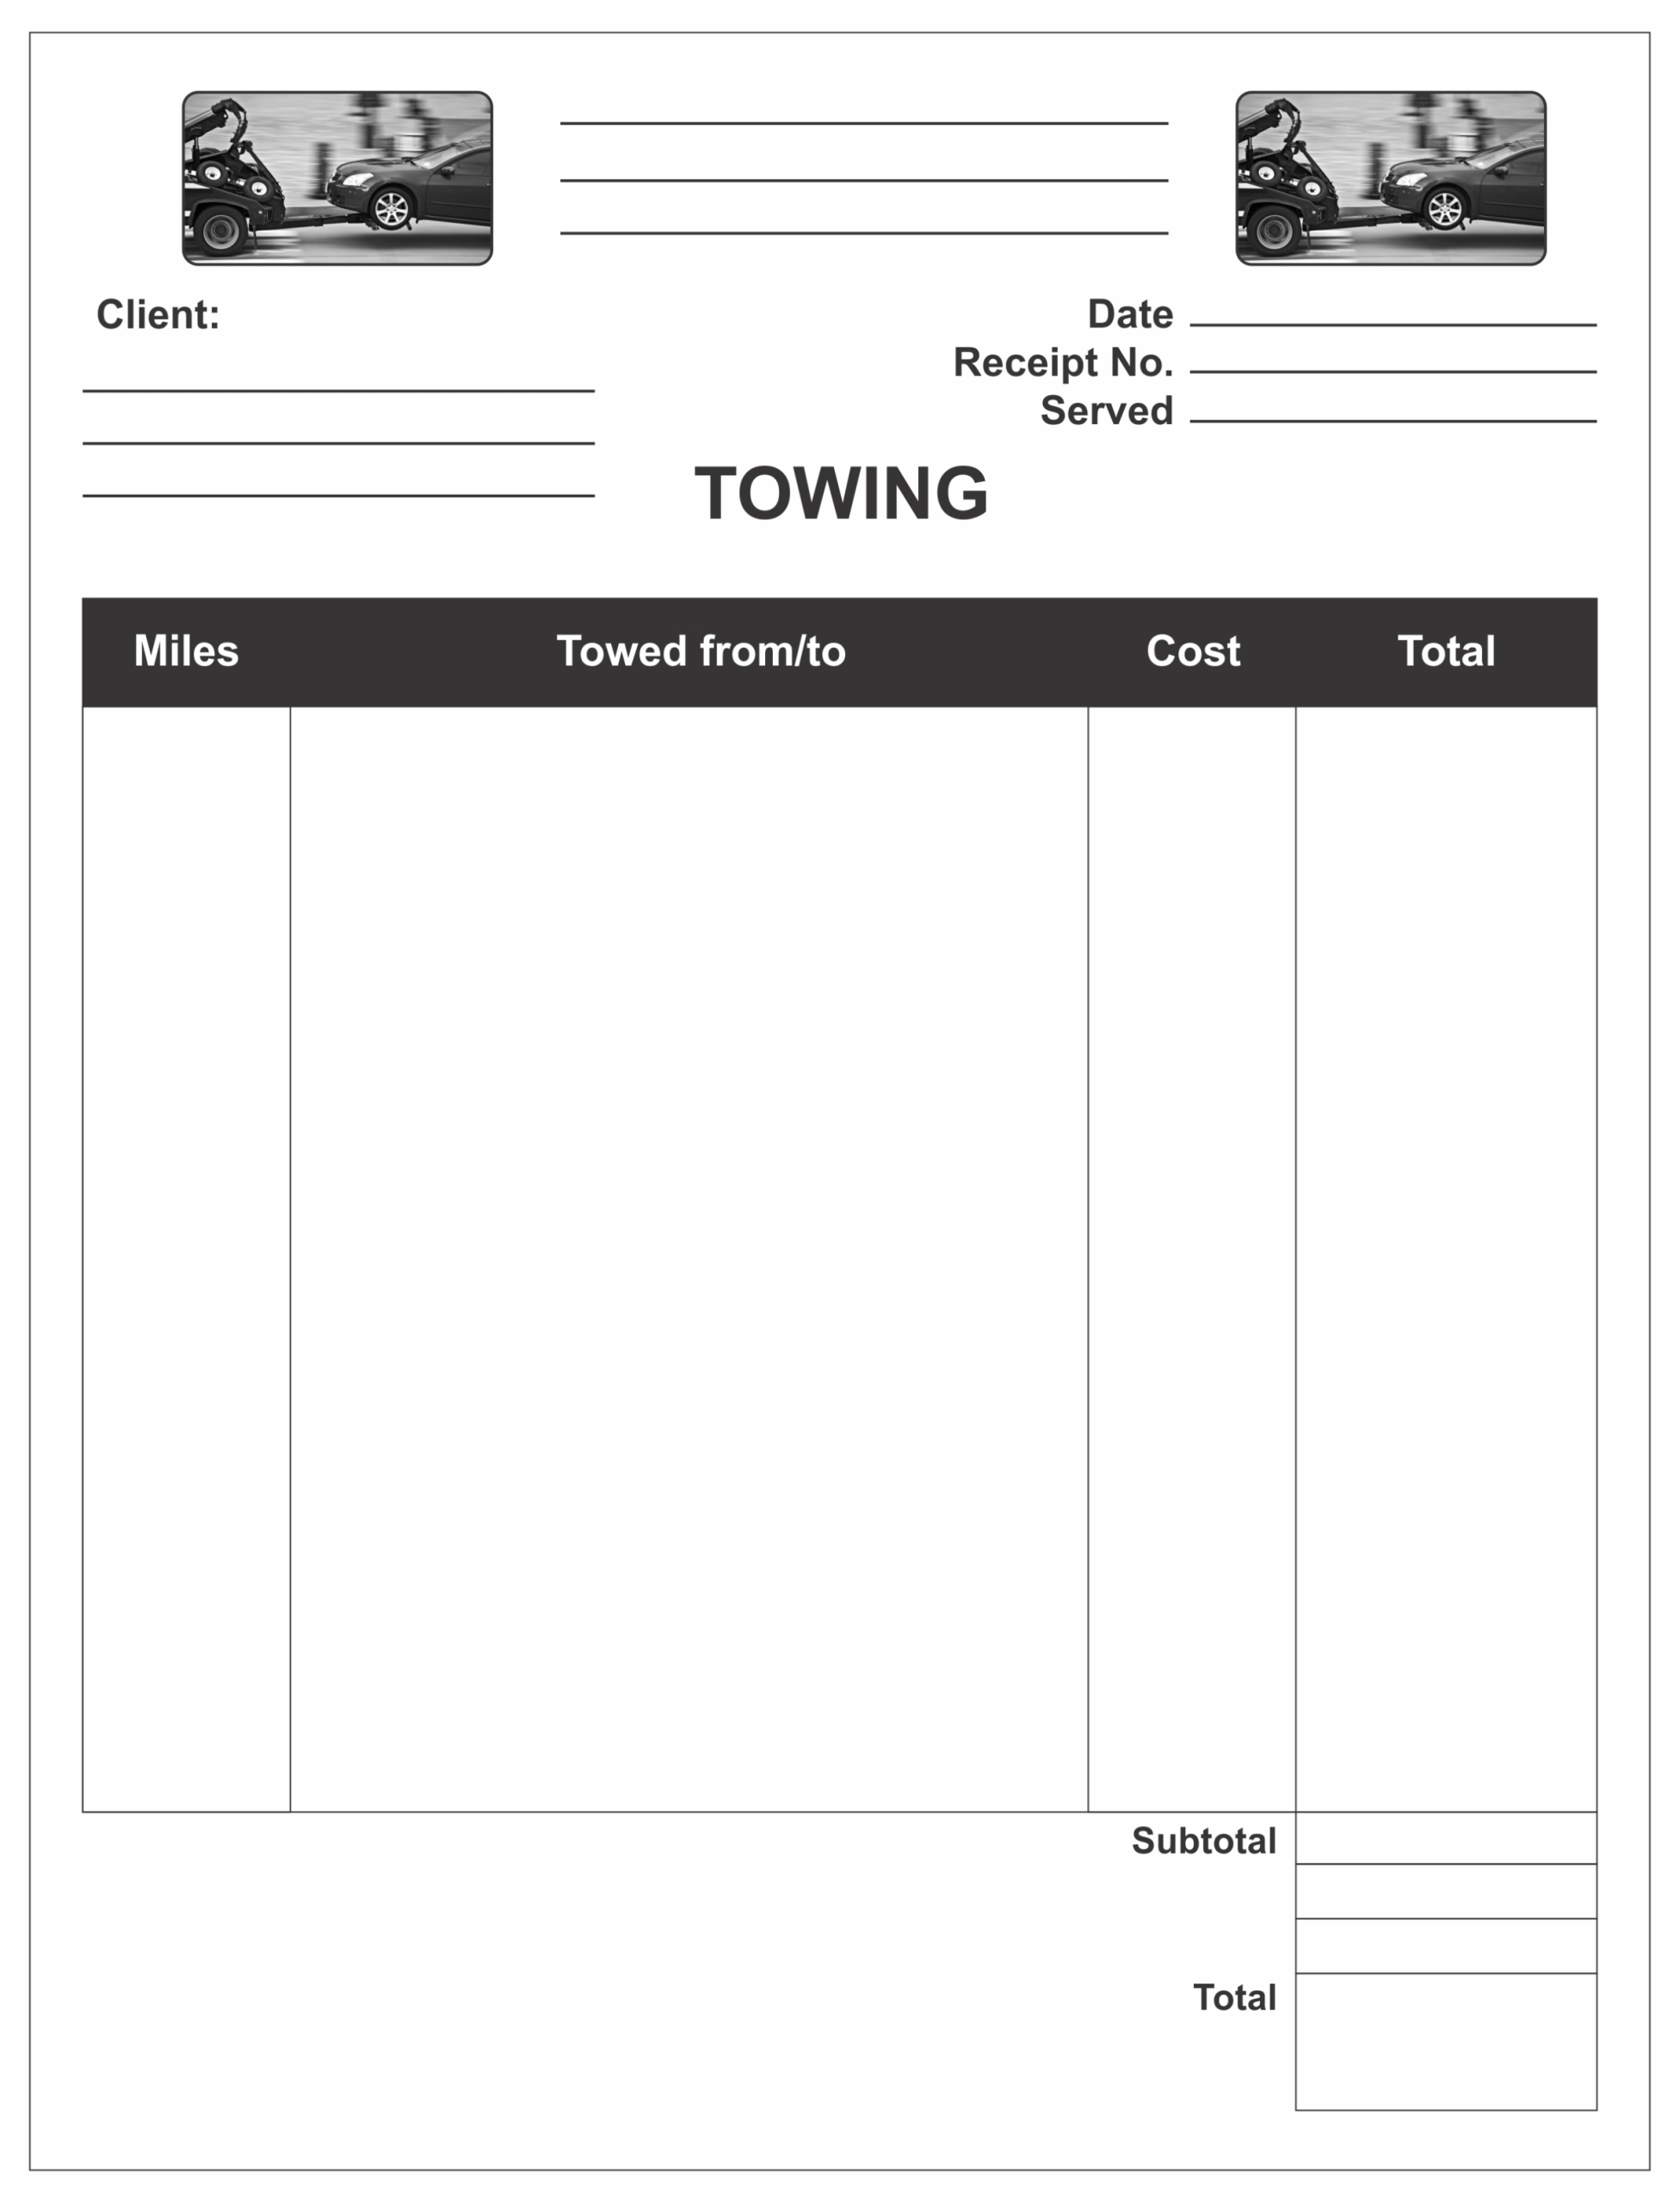 Custom Towing Service Receipts Printing | Ezeeprinting Pertaining To Towing Service Agreement Template